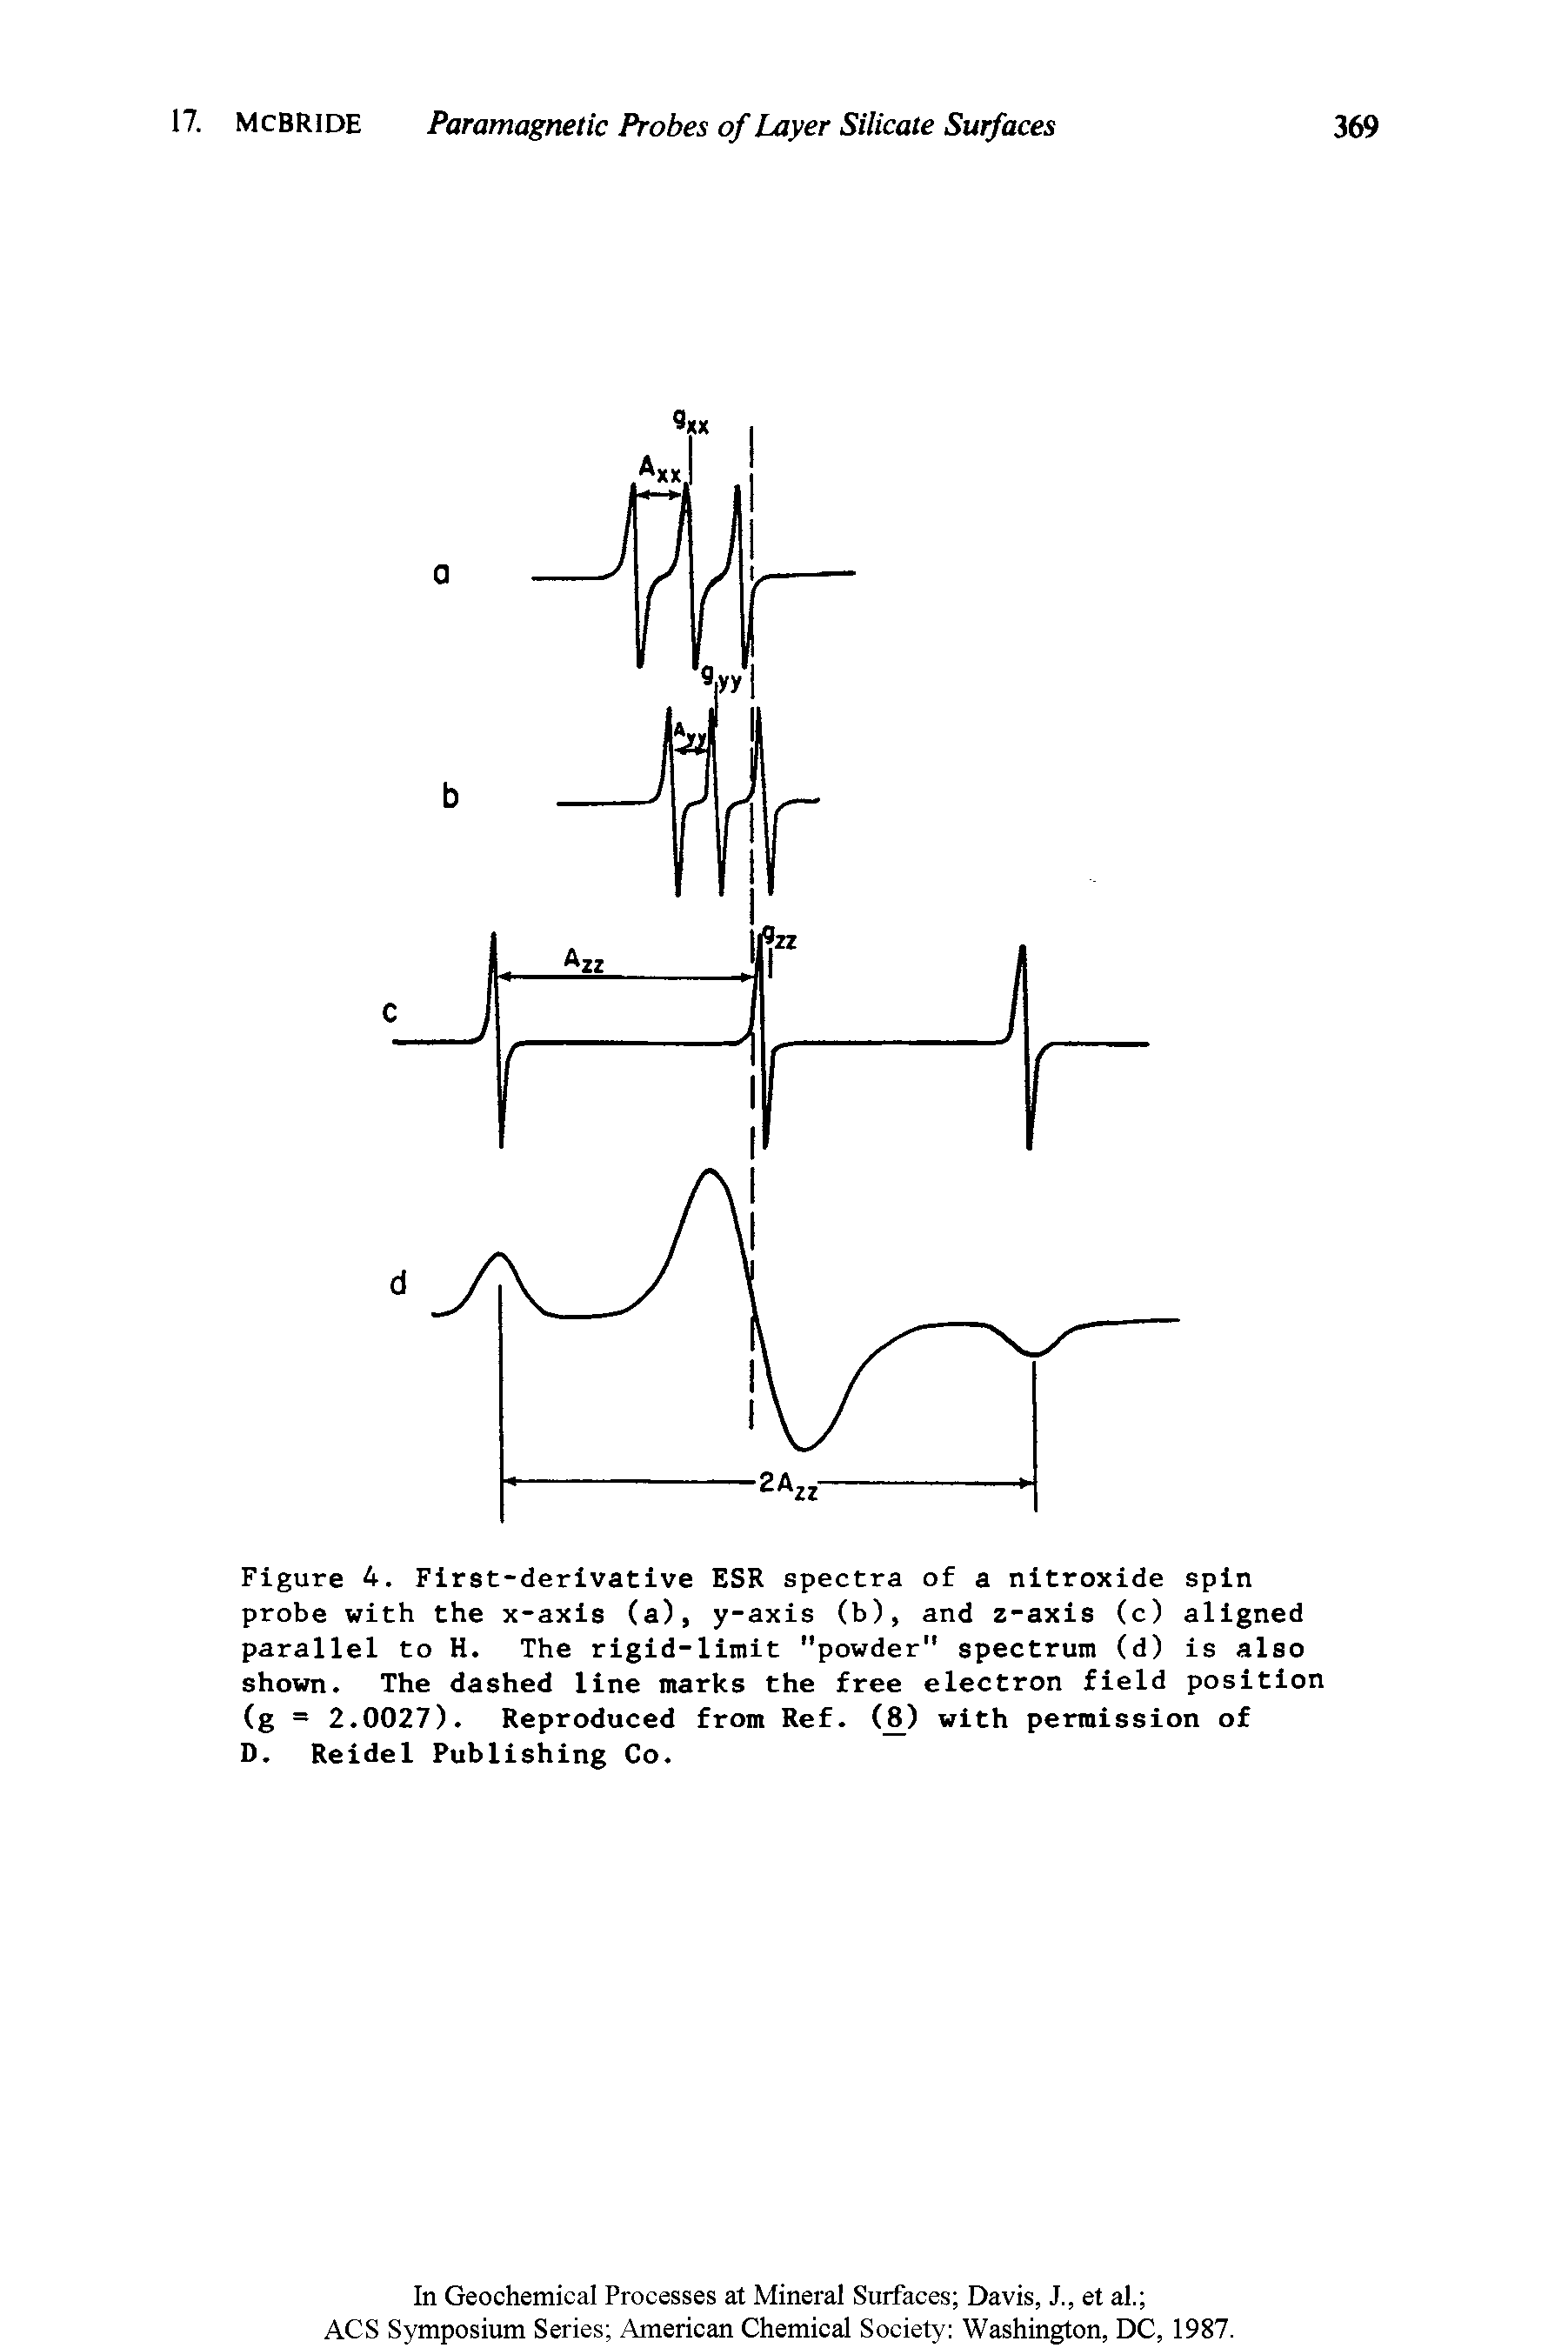 Figure 4. First-derivative ESR spectra of a nitroxide spin probe with the x-axis (a), y-axis (b), and z-axis (c) aligned parallel to H. The rigid-limit "powder" spectrum (d) is also shown. The dashed line marks the free electron field position (g = 2.0027). Reproduced from Ref. (jl) with permission of D. Reidel Publishing Co.